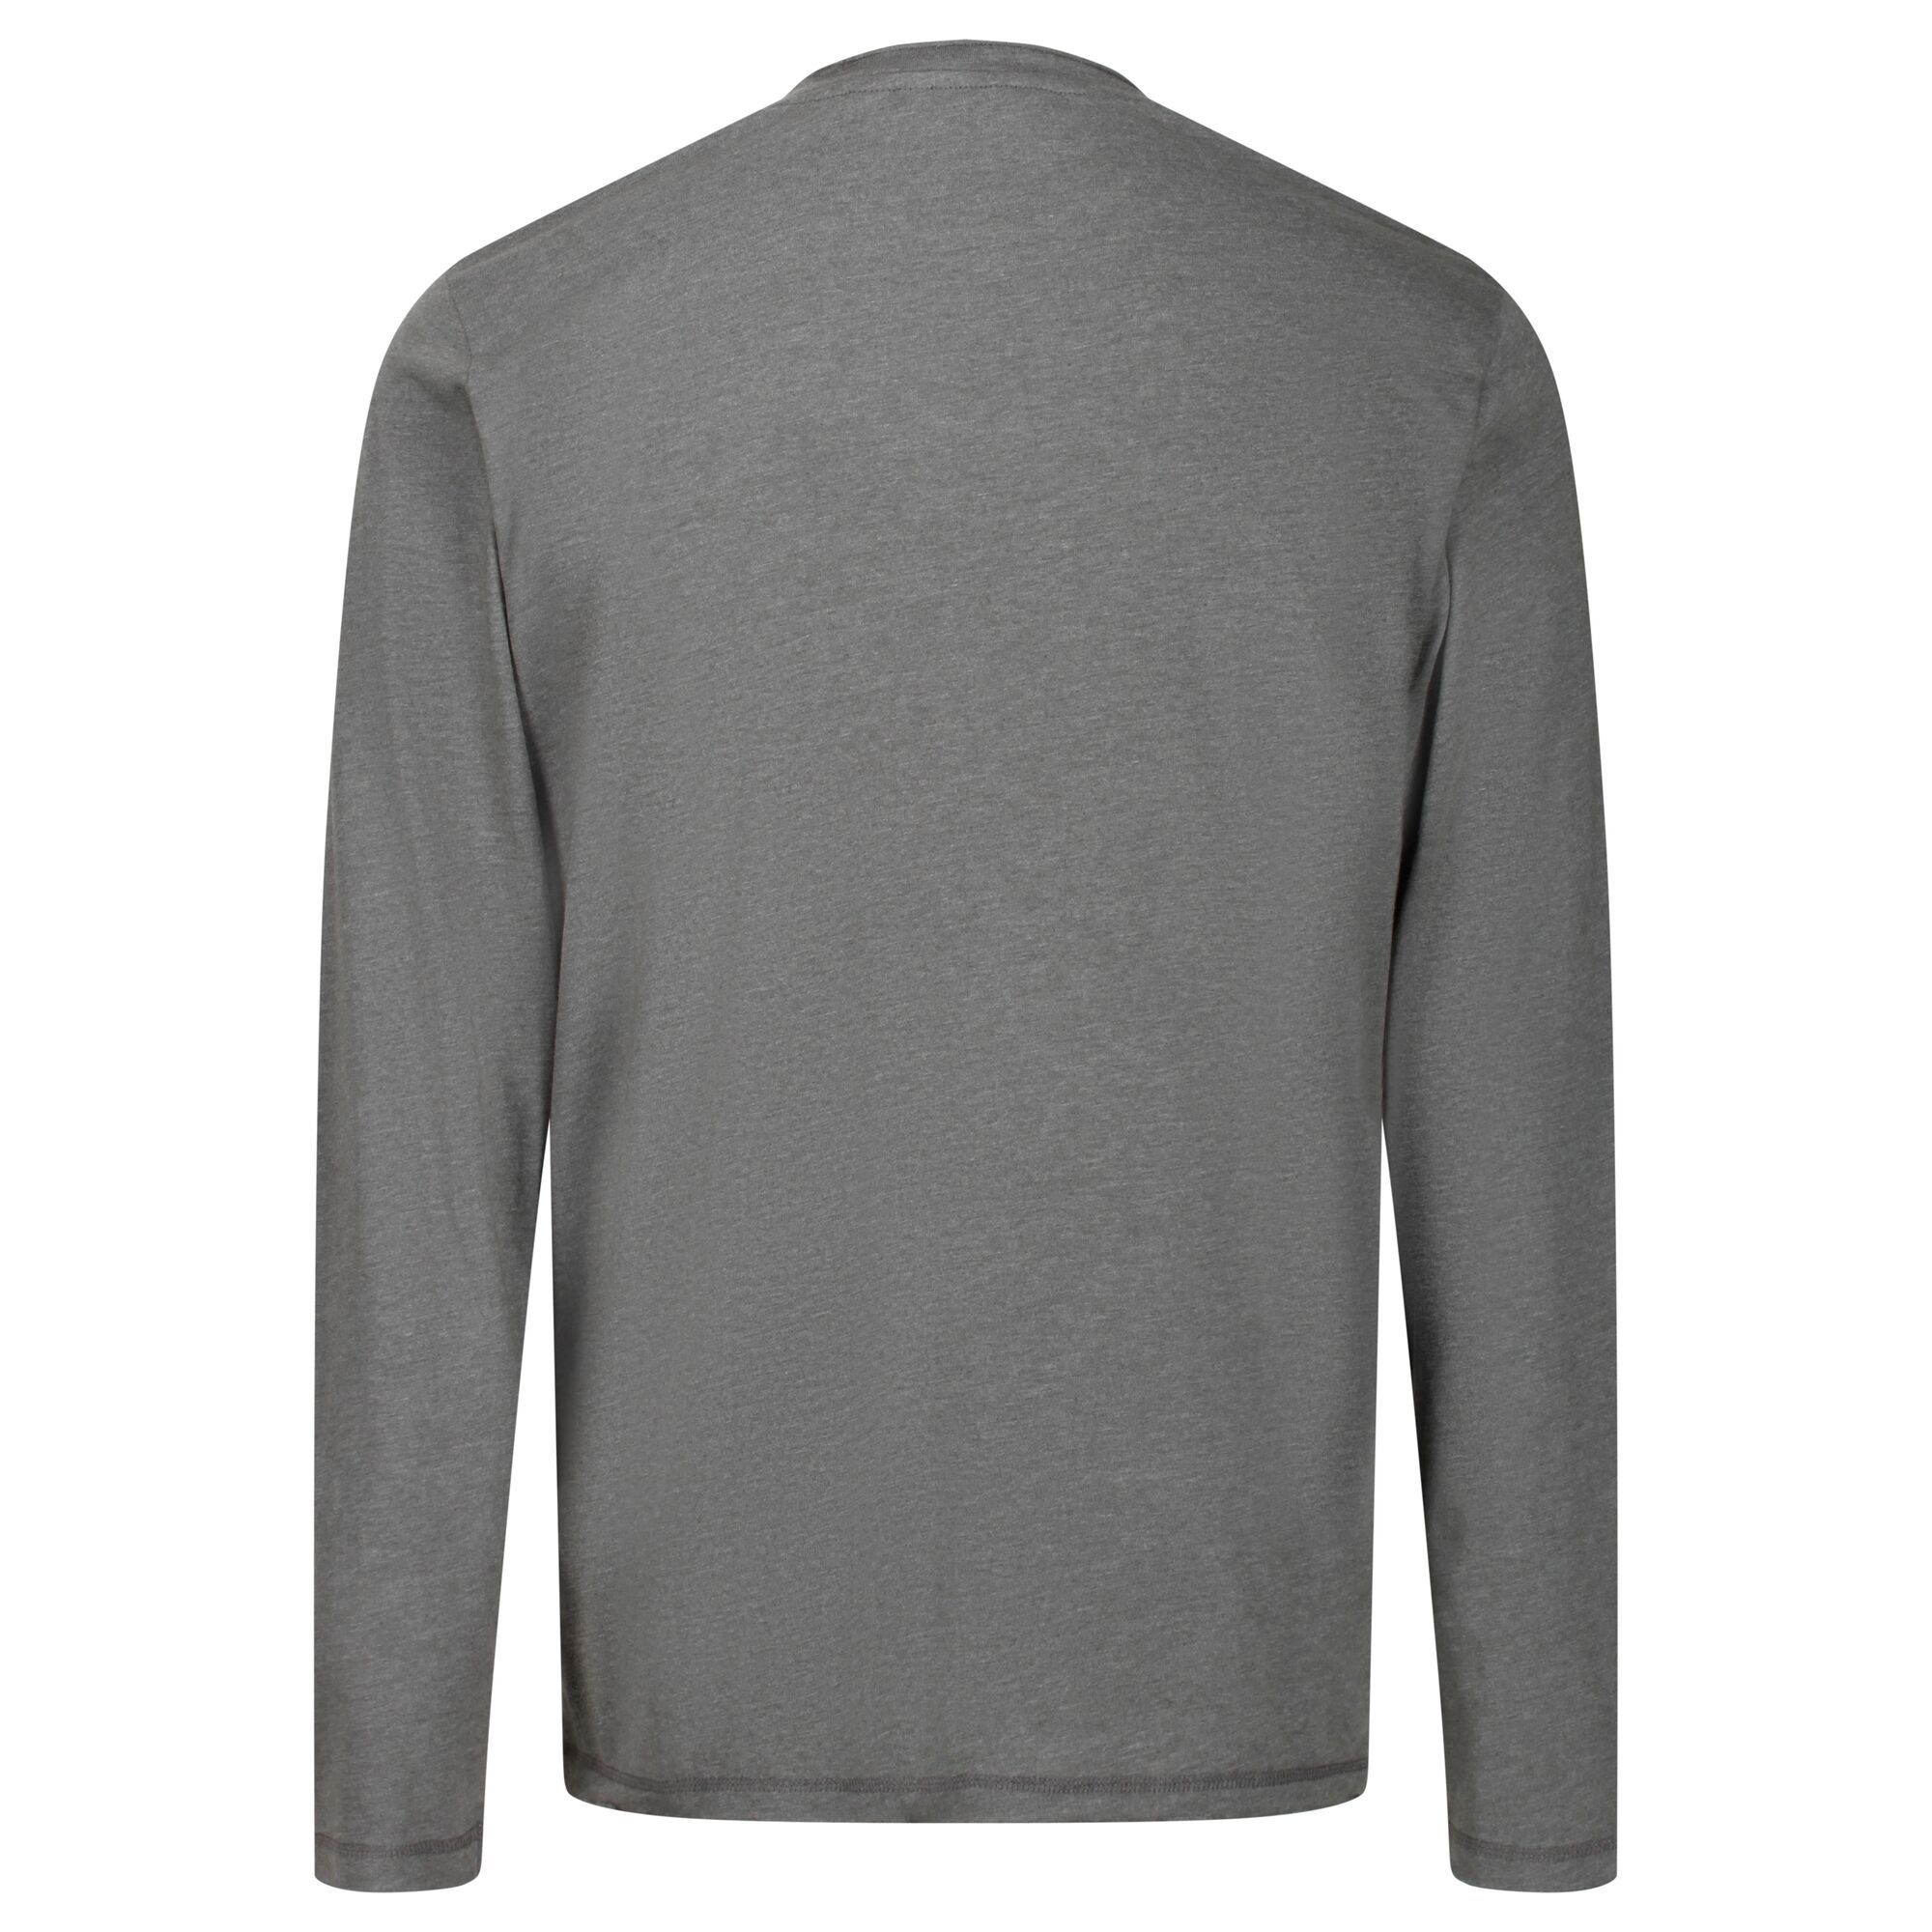 Mens long sleeved T-shirt made of 160gsm Coolweave Hybrid cotton/Polyester single jersey. Ideal for active and casual use. 40% Polyester, 60% Cotton.